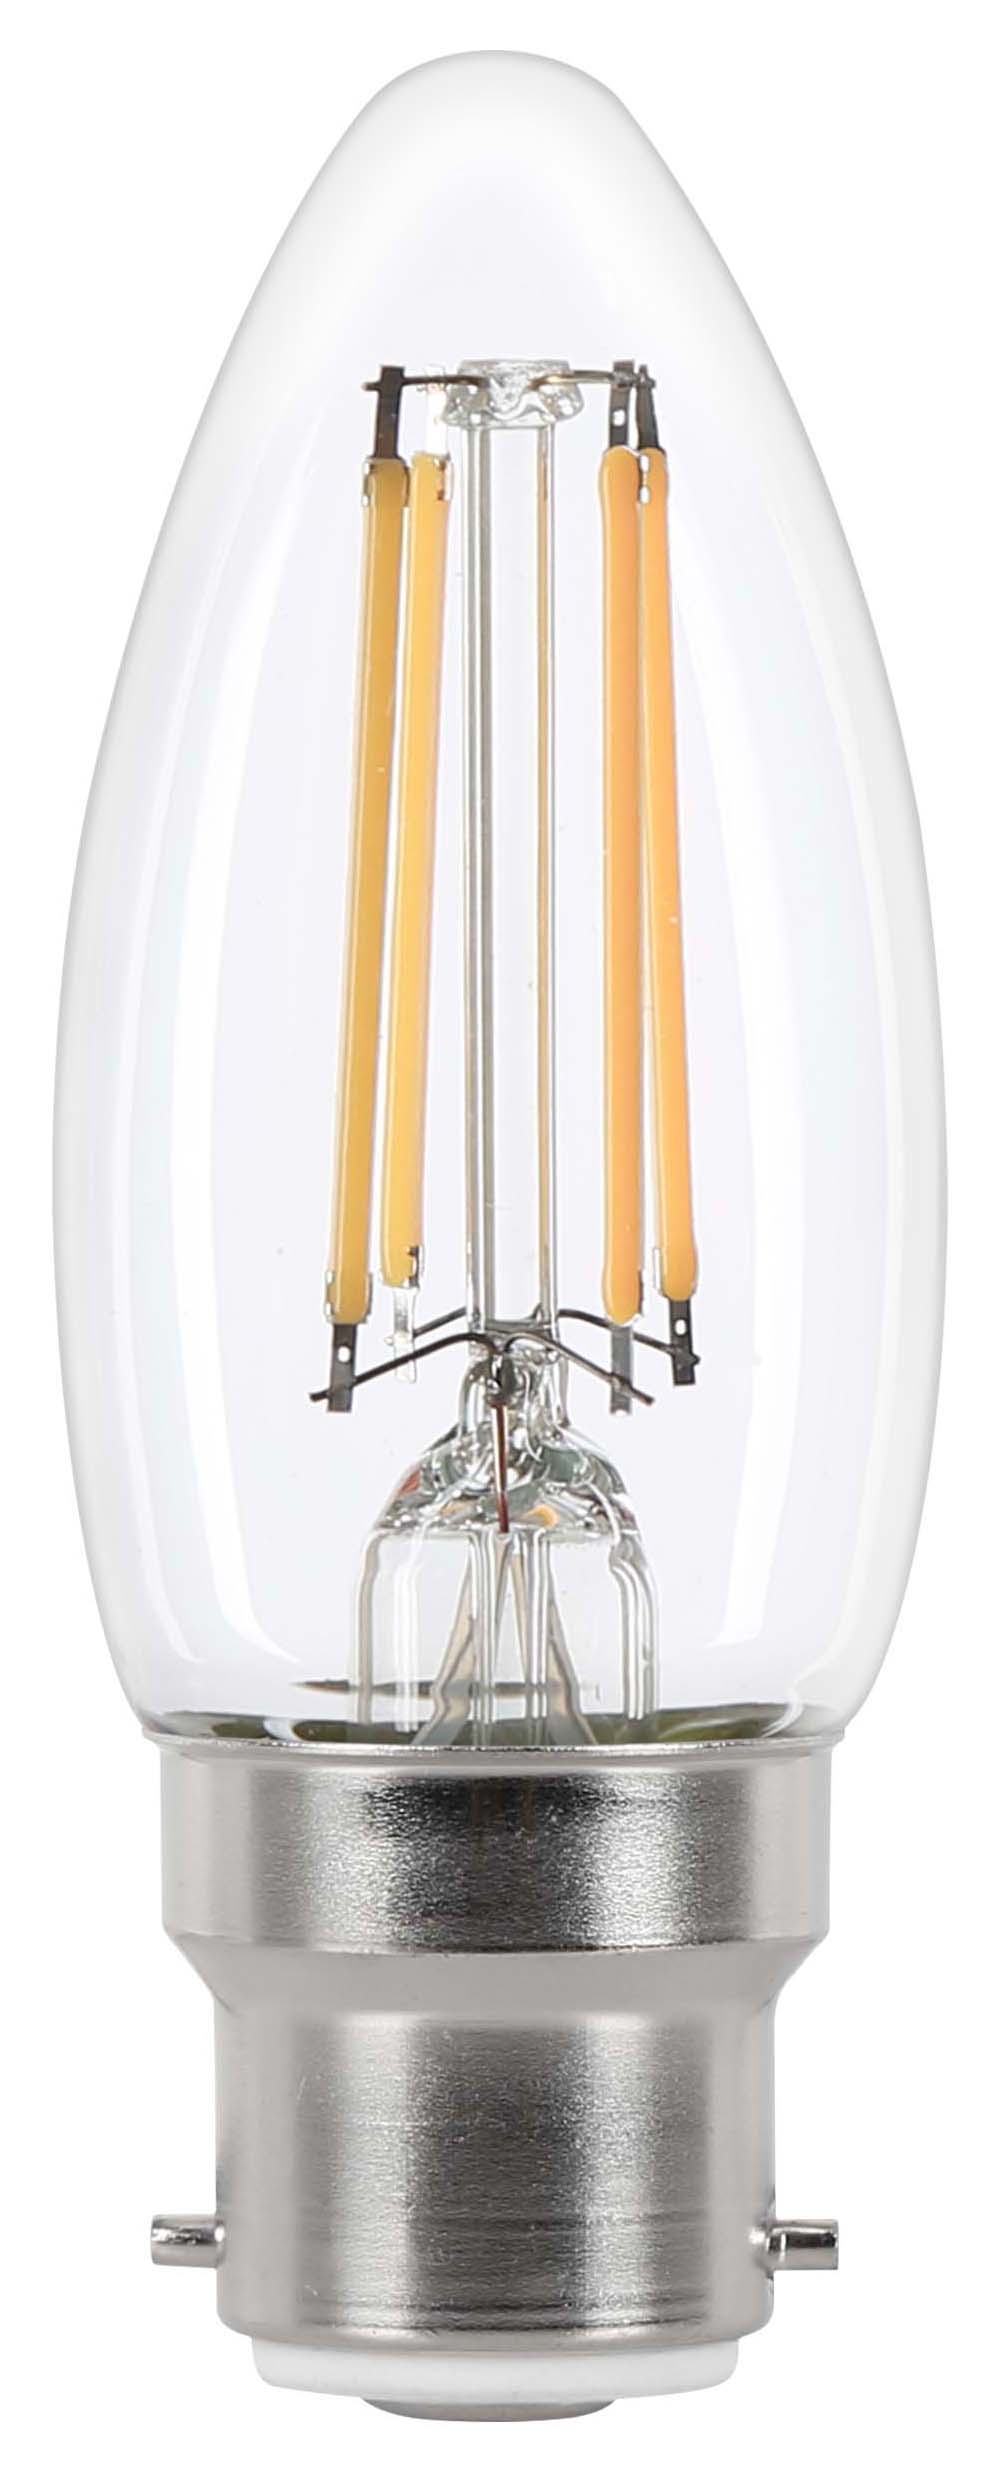 Image of Wickes Non-Dimmable Filament B22 Candle 3.4W Warm White Light Bulb - Pack of 4